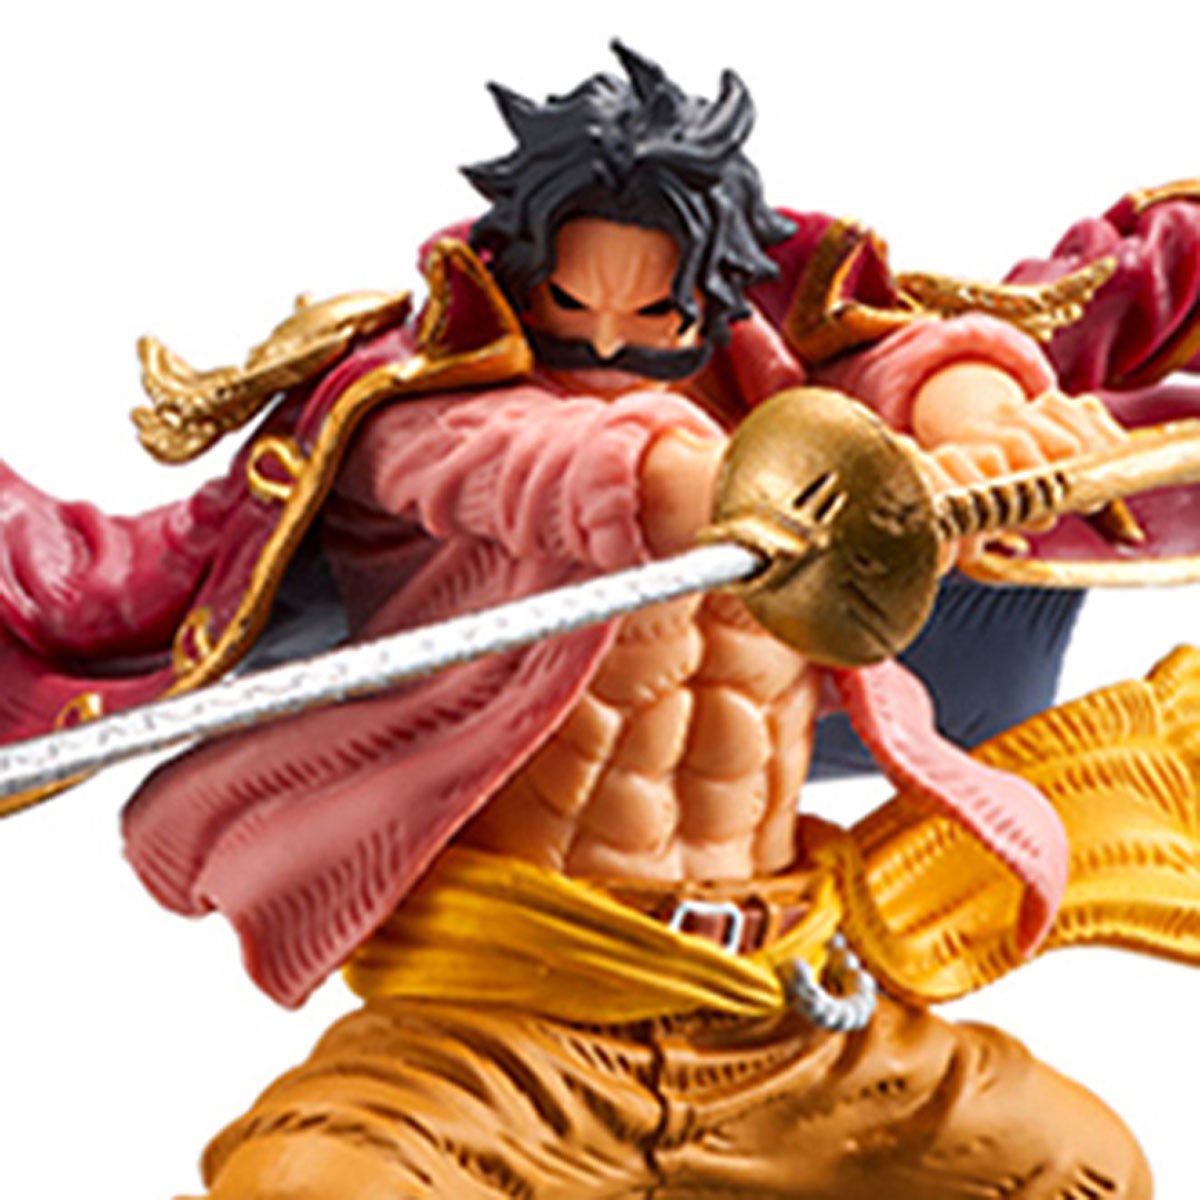 How Much Would You Pay for a Solid Gold One Piece Figure?